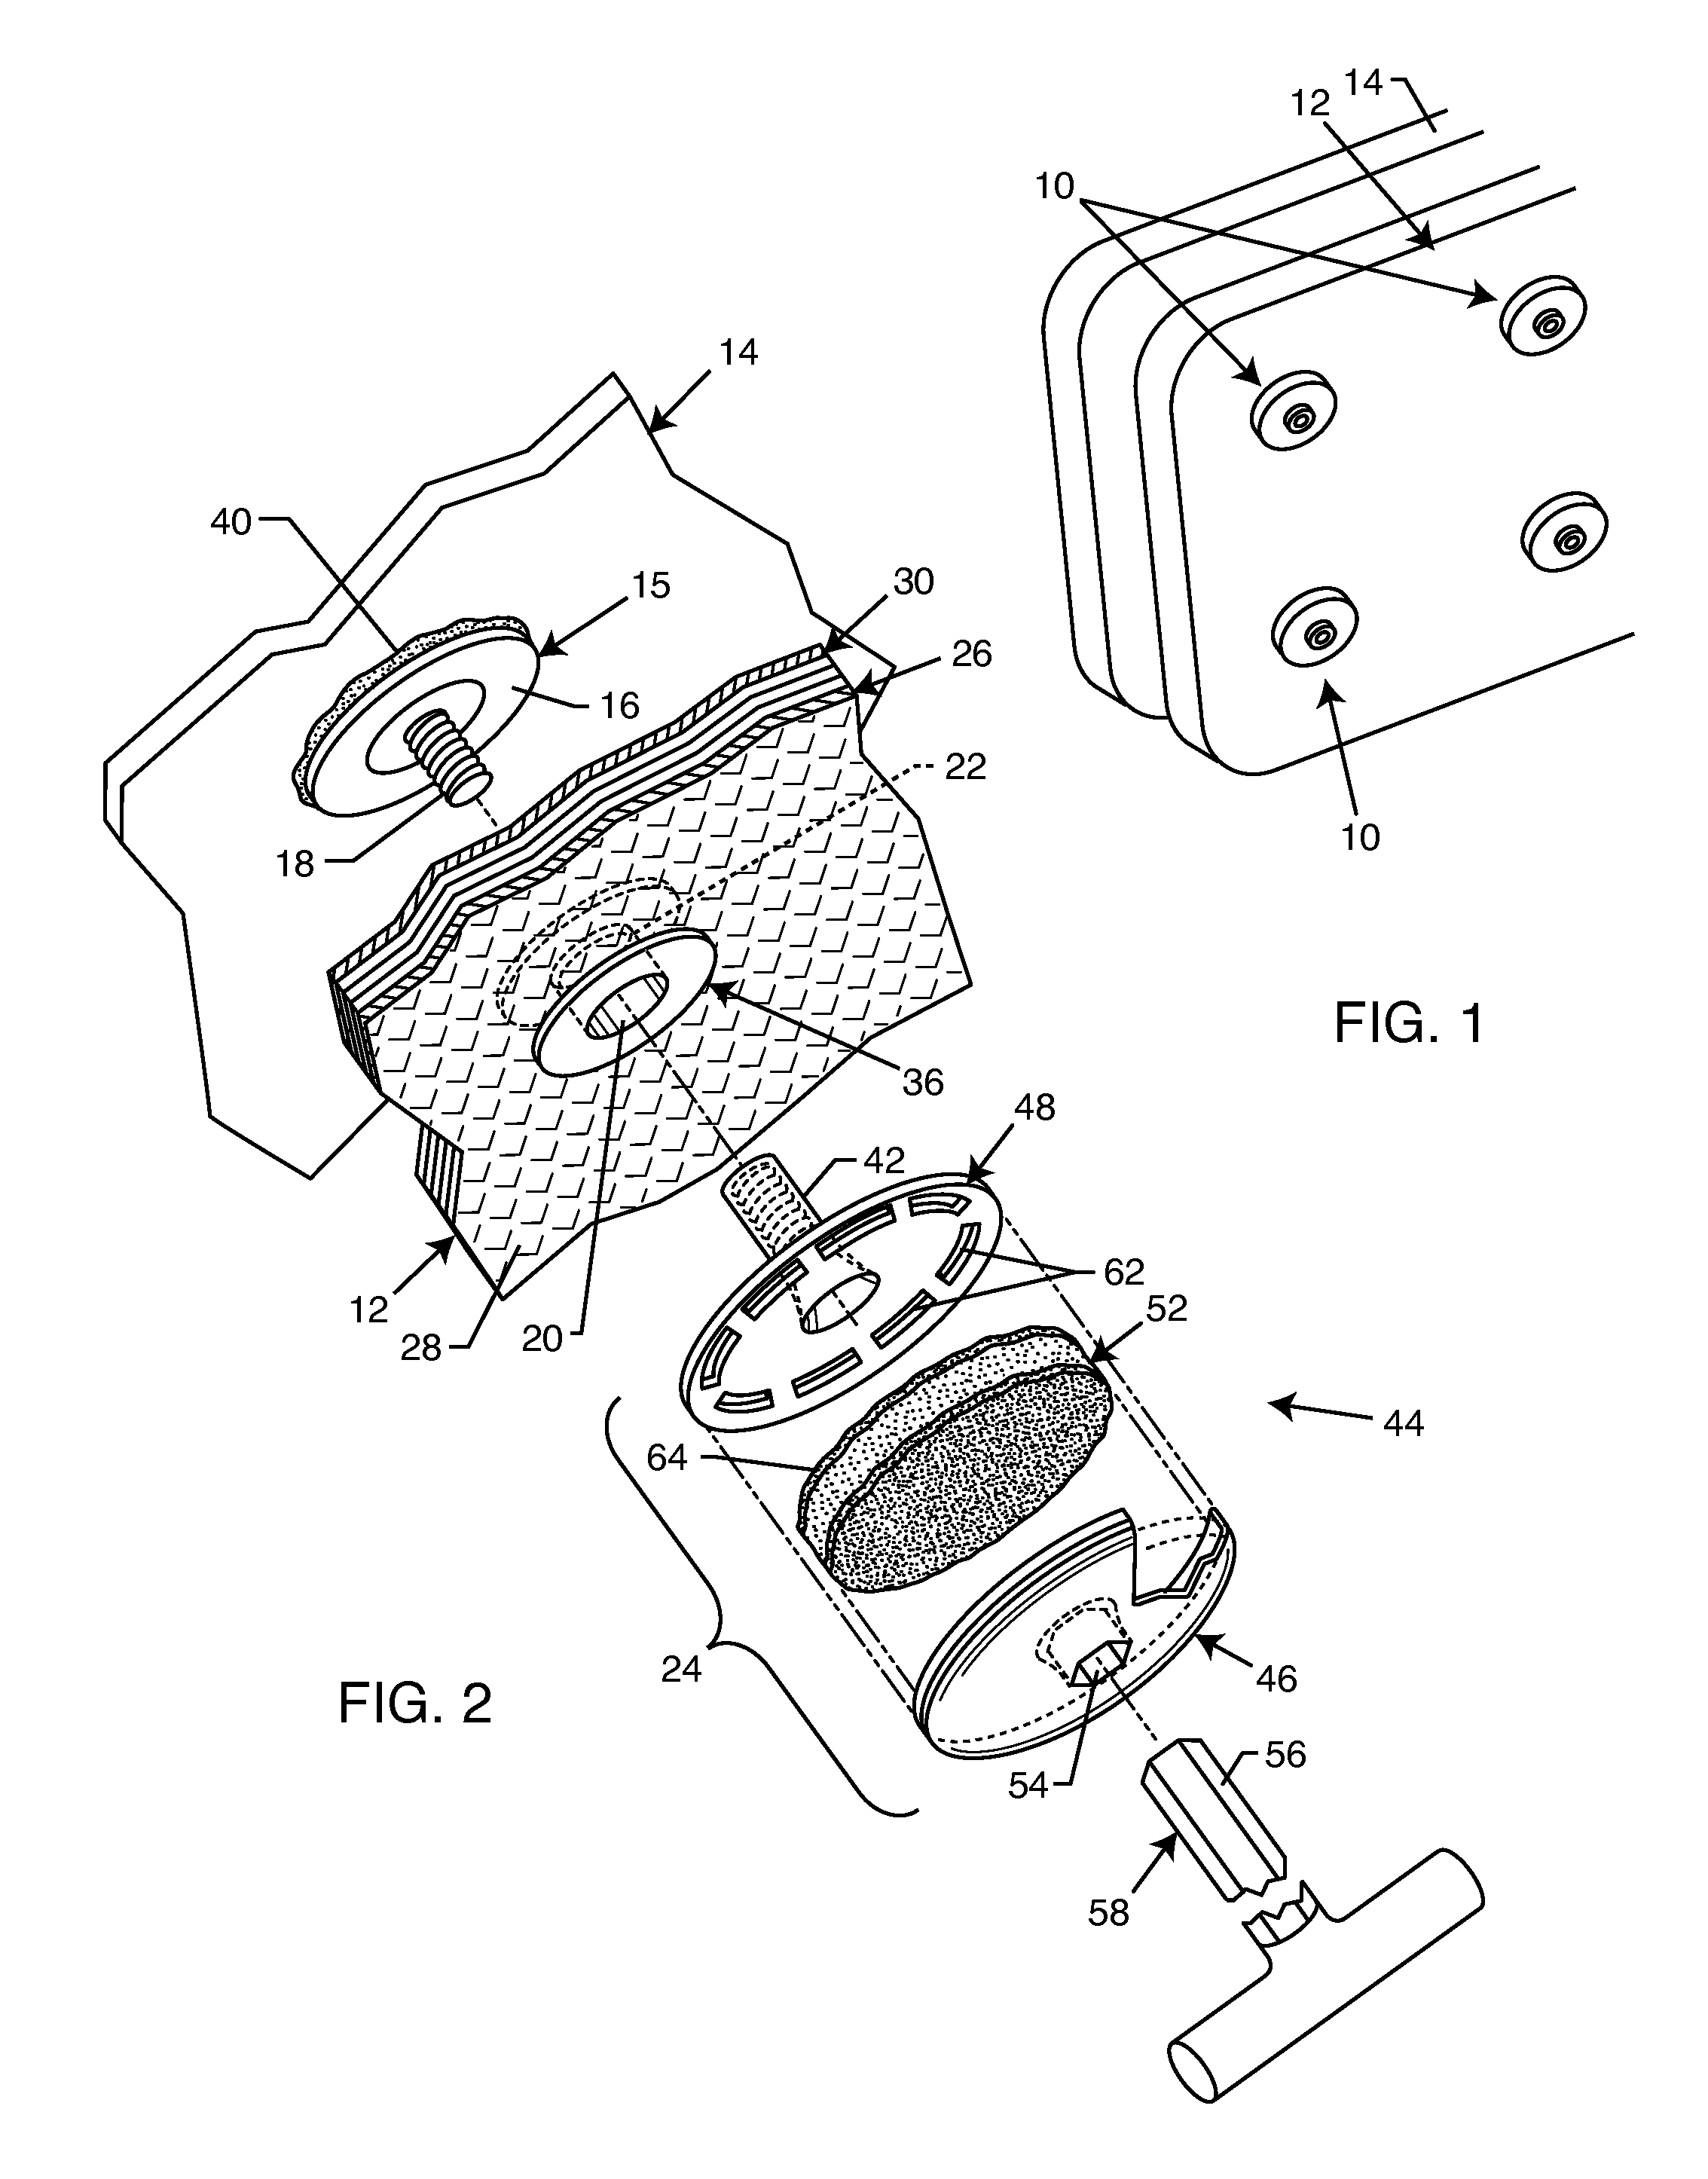 Adhesive bonded attachment assembly for an insulation blanket